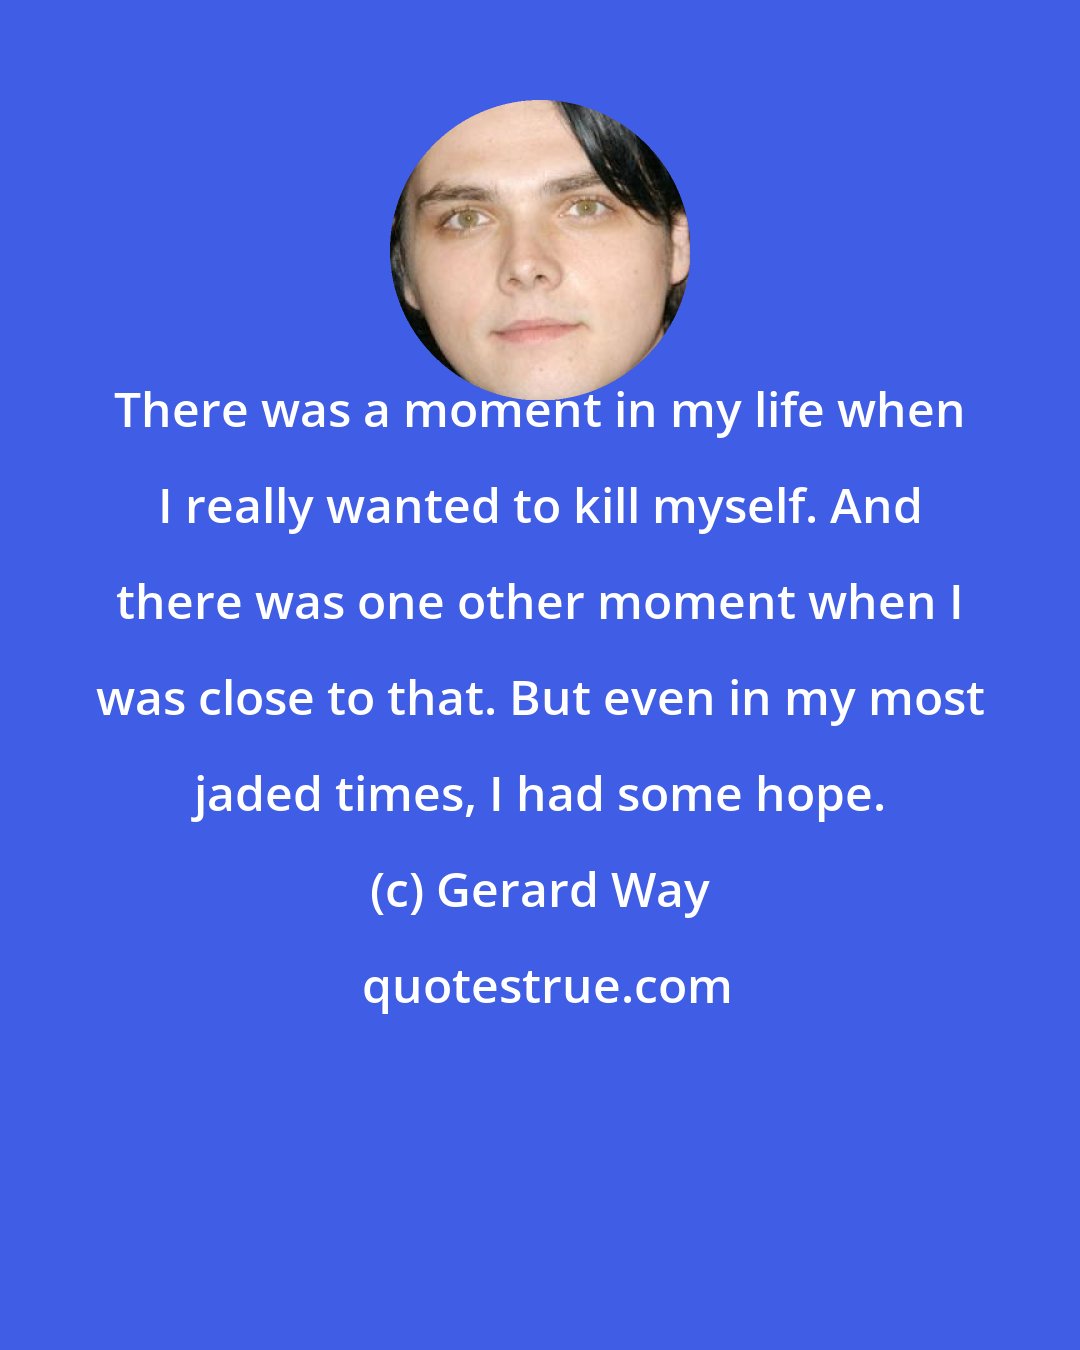 Gerard Way: There was a moment in my life when I really wanted to kill myself. And there was one other moment when I was close to that. But even in my most jaded times, I had some hope.